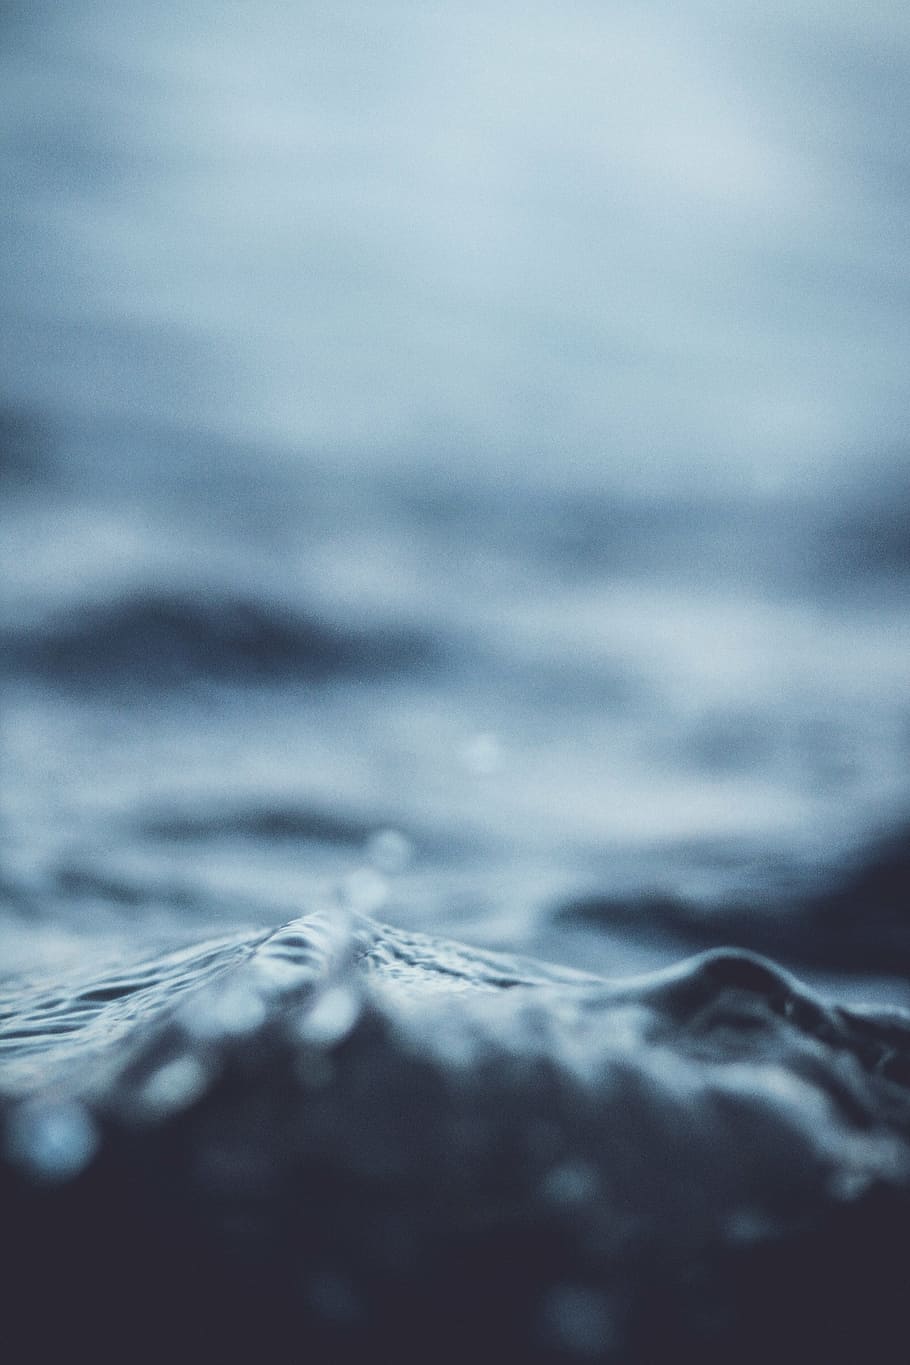 untitled, sea, ocean, water, waves, nature, blur, selective focus, day, close-up